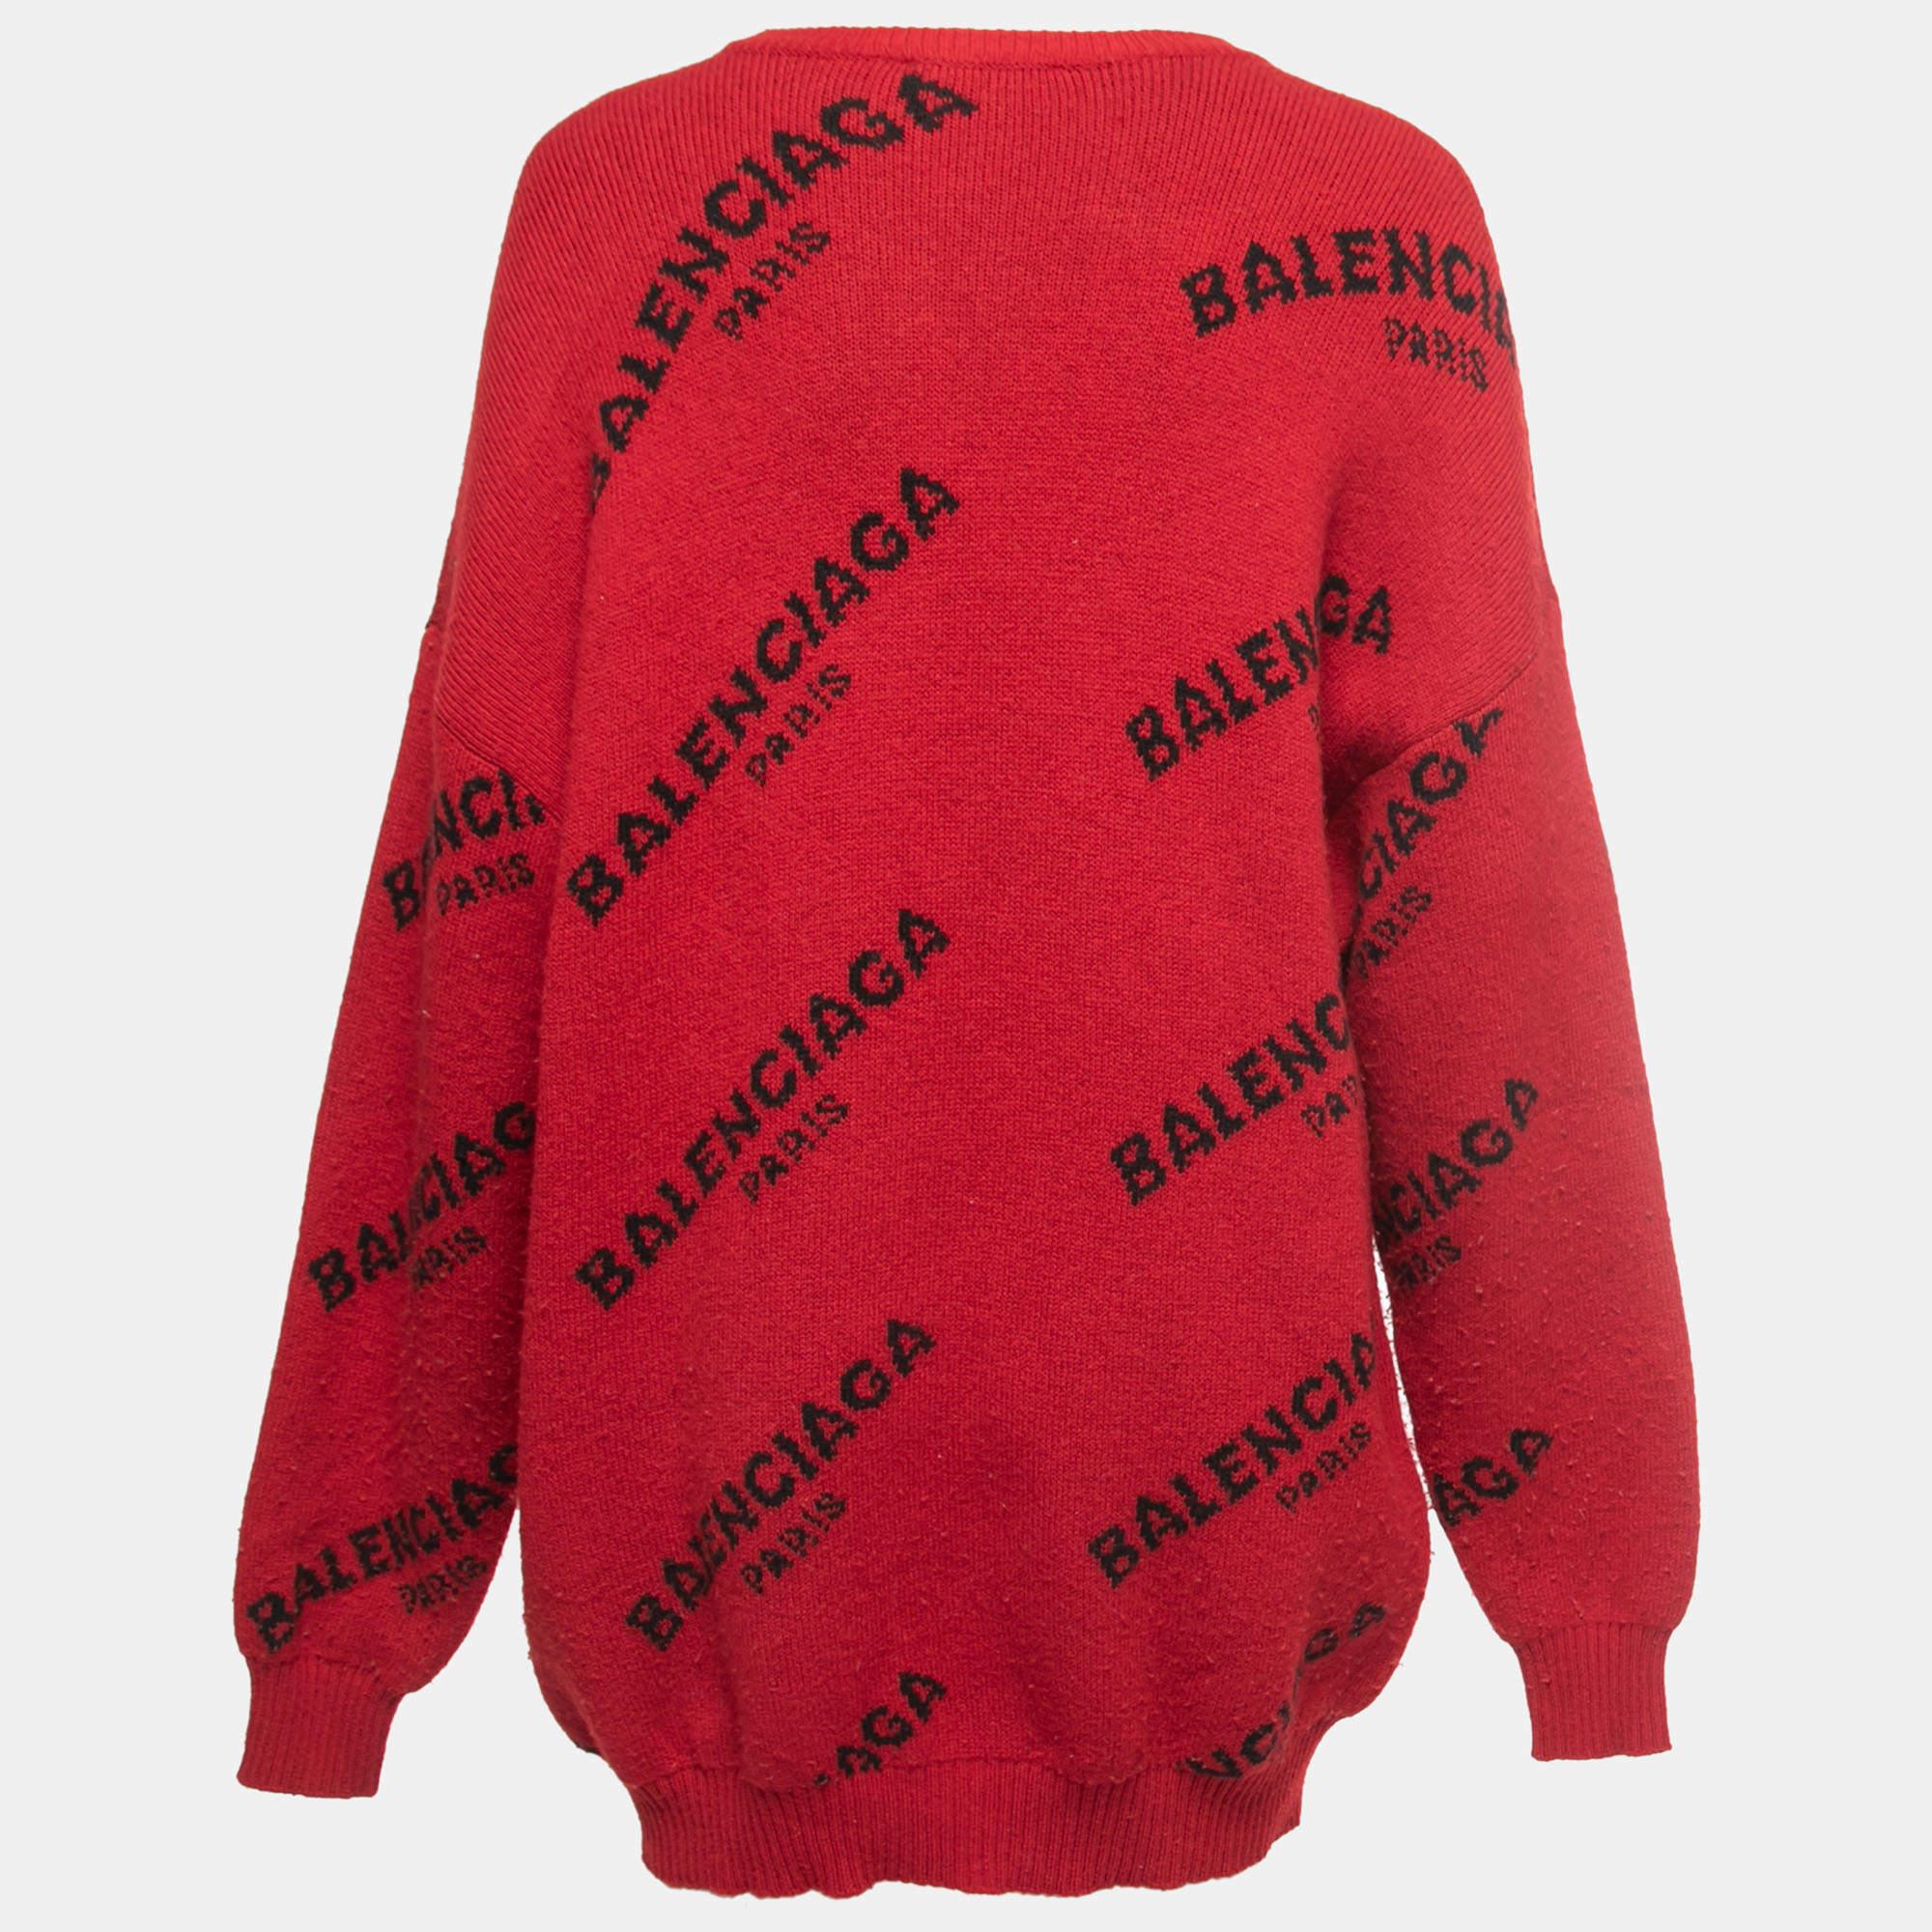 This jumper from the house of Balenciaga is perfect for your casual wear. It is made from quality fabric to give you immense comfort.

